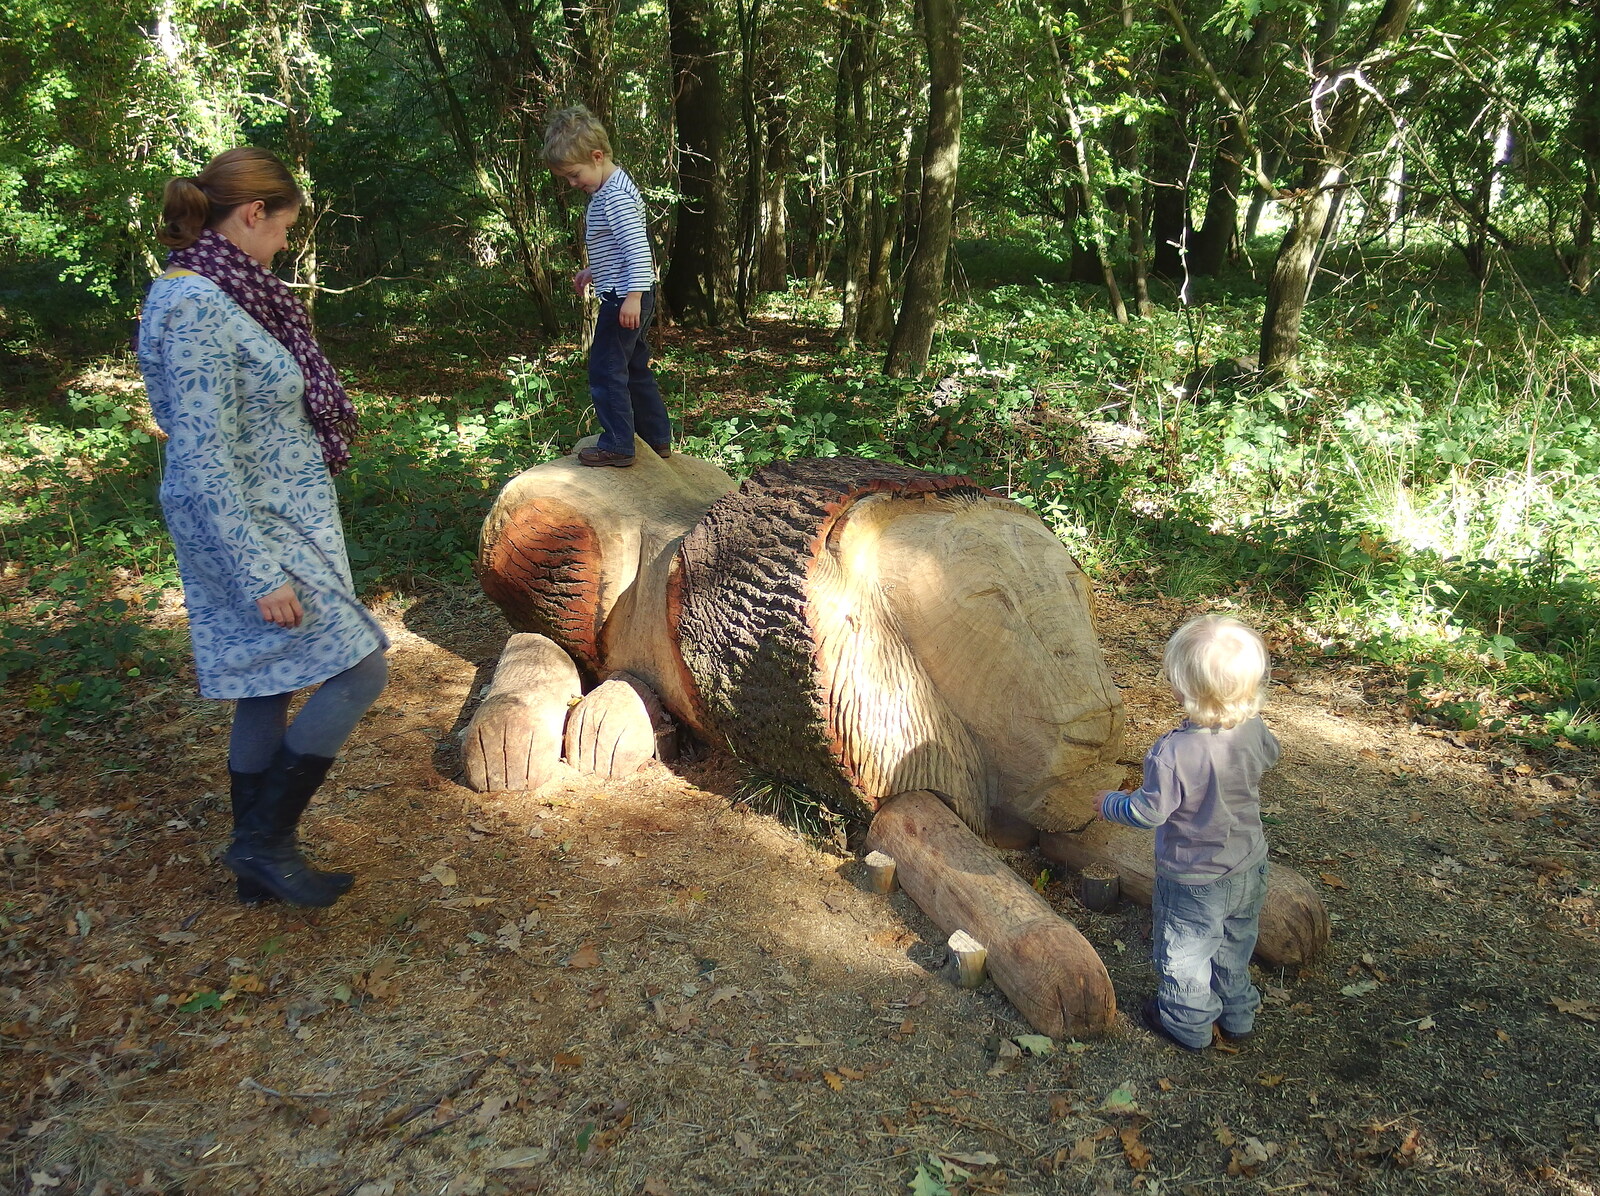 The boys on the carved lion from A Walk Around Thornham, and Jacqui Dankworth, Bungay, Suffolk - 6th October 2013